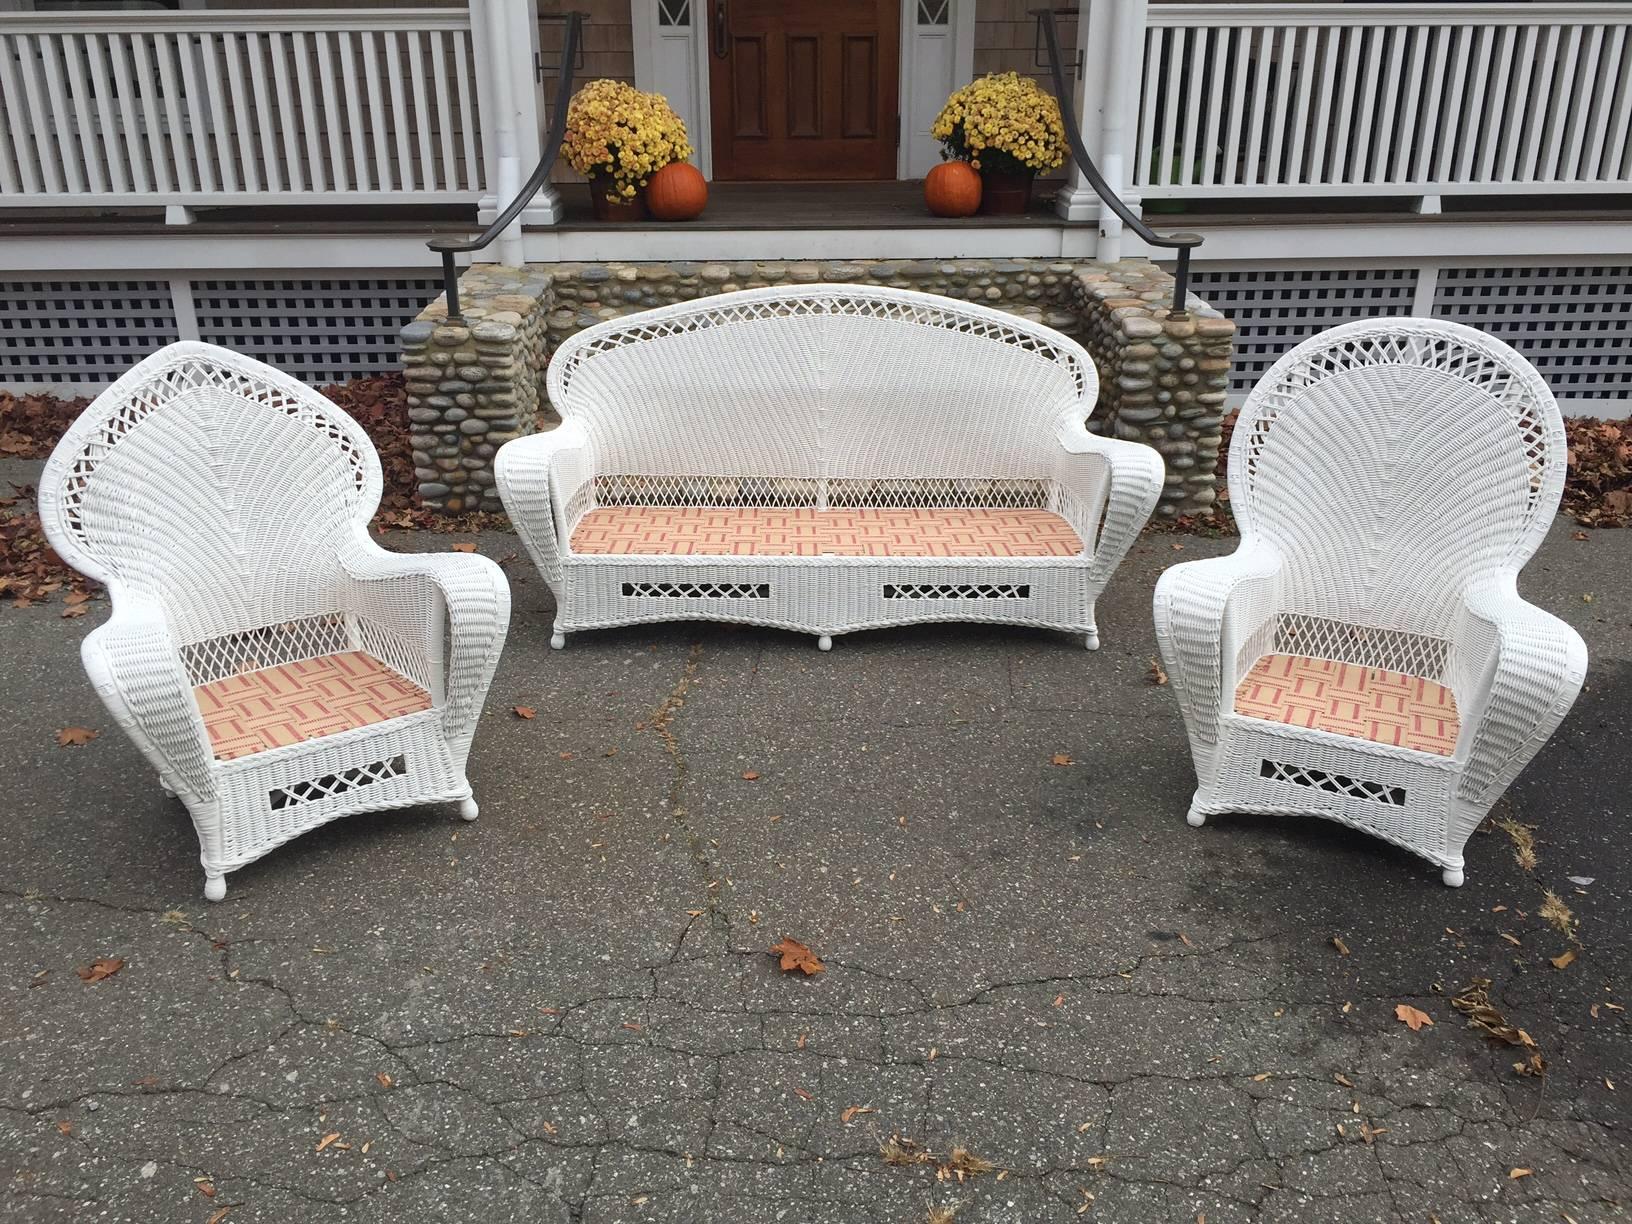 Antique Art Deco Wicker Parlor Set in fresh white paint.  Seating is large in scale and generously proportioned providing a comfortable feel.

Sofa measures 78